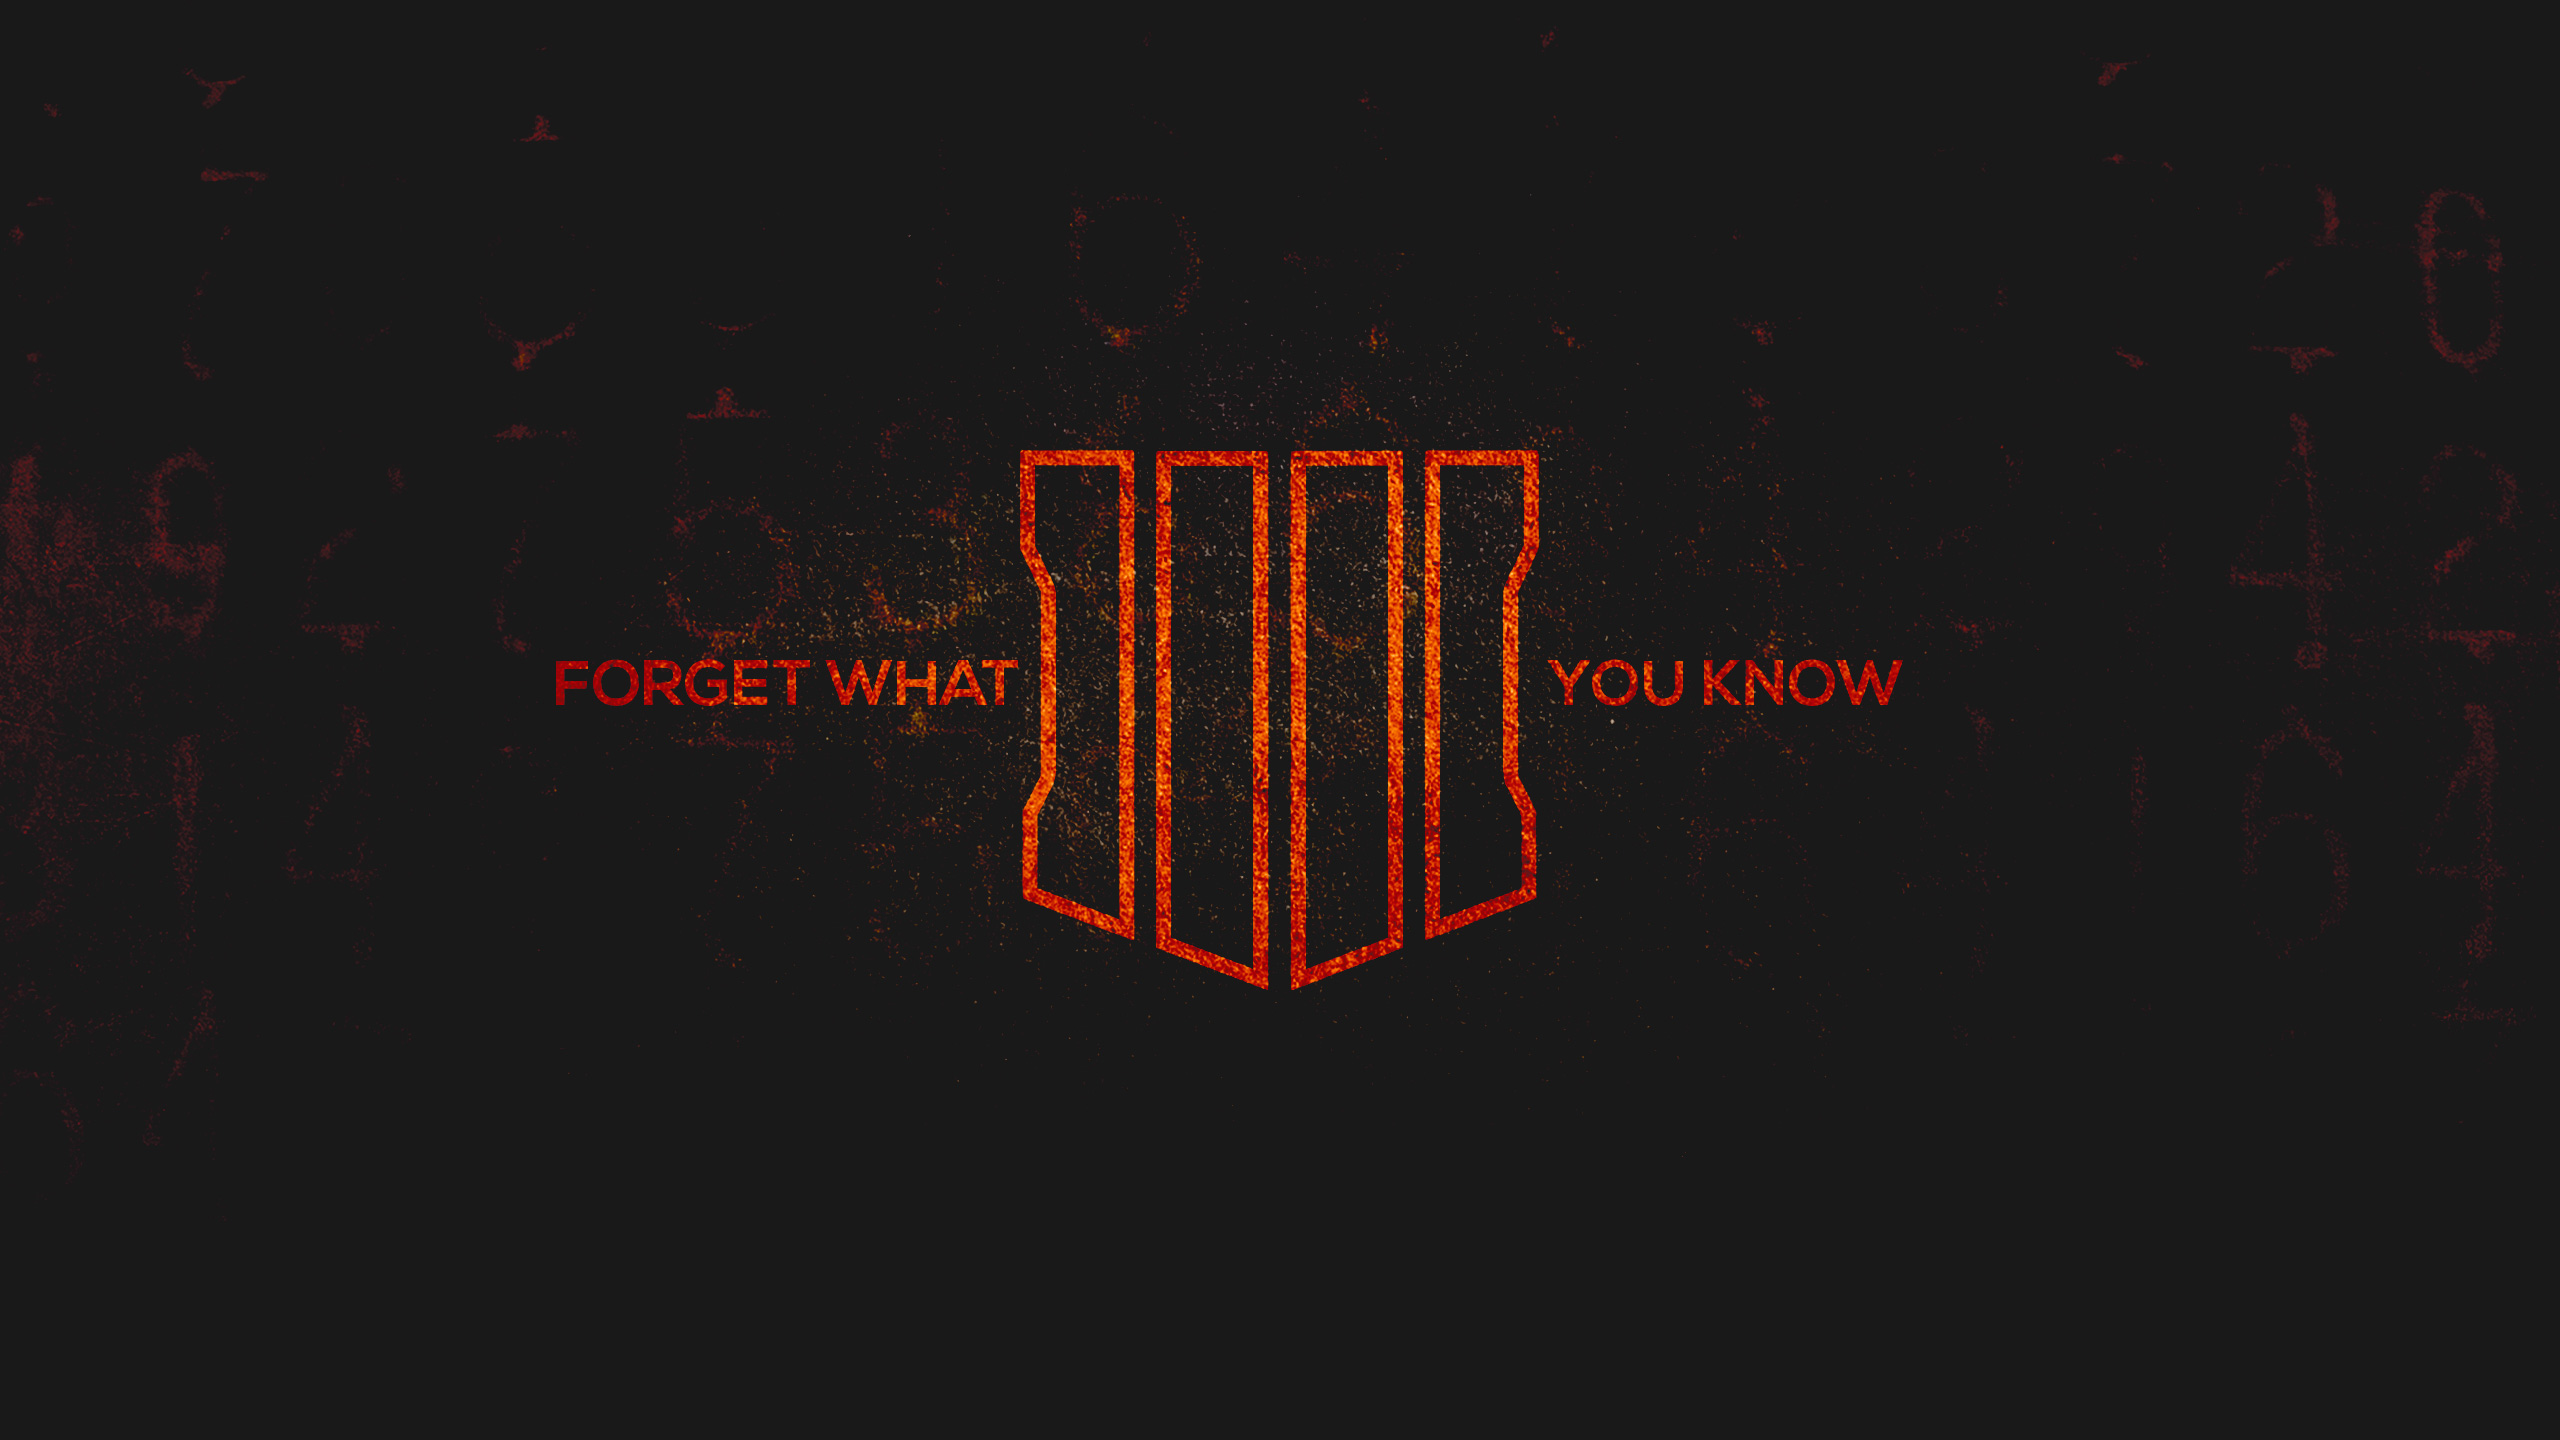 Wallpapers call of duty psb games call of duty black ops 4 on the desktop